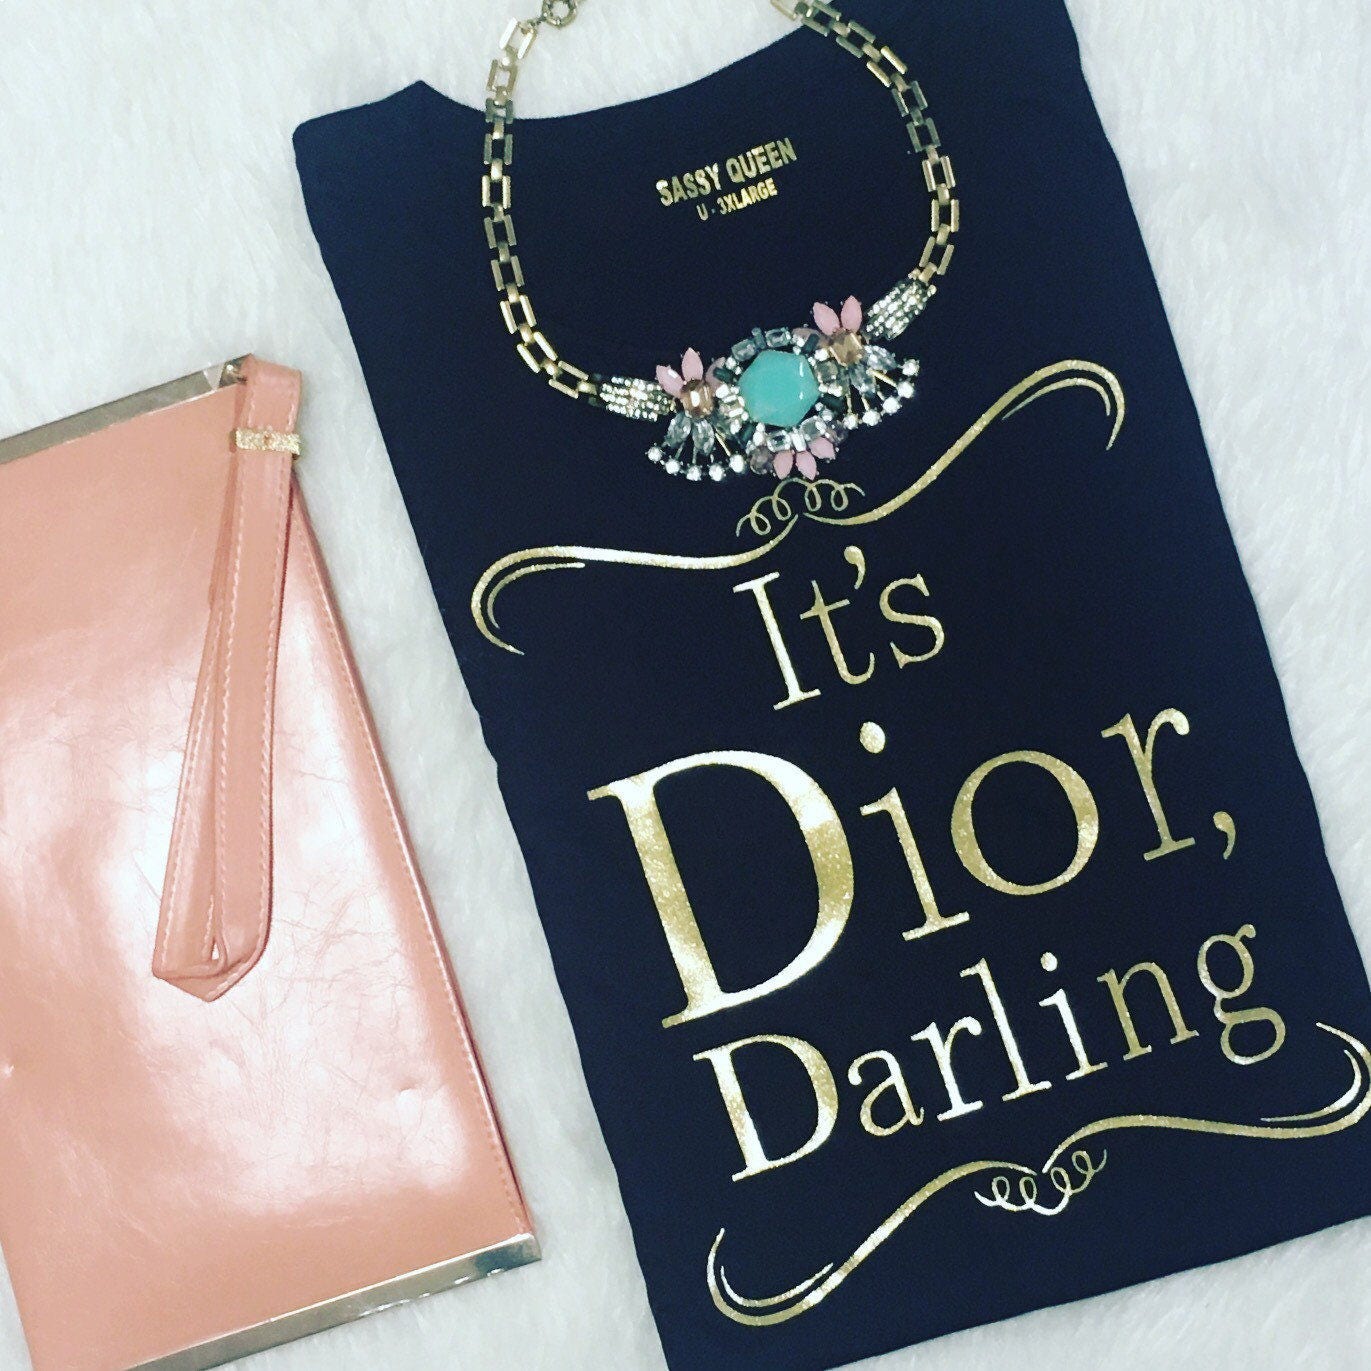 It's Dior Darling / Statement Tee / Graphic Tee / Statement Tshirt / Graphic Tshirt